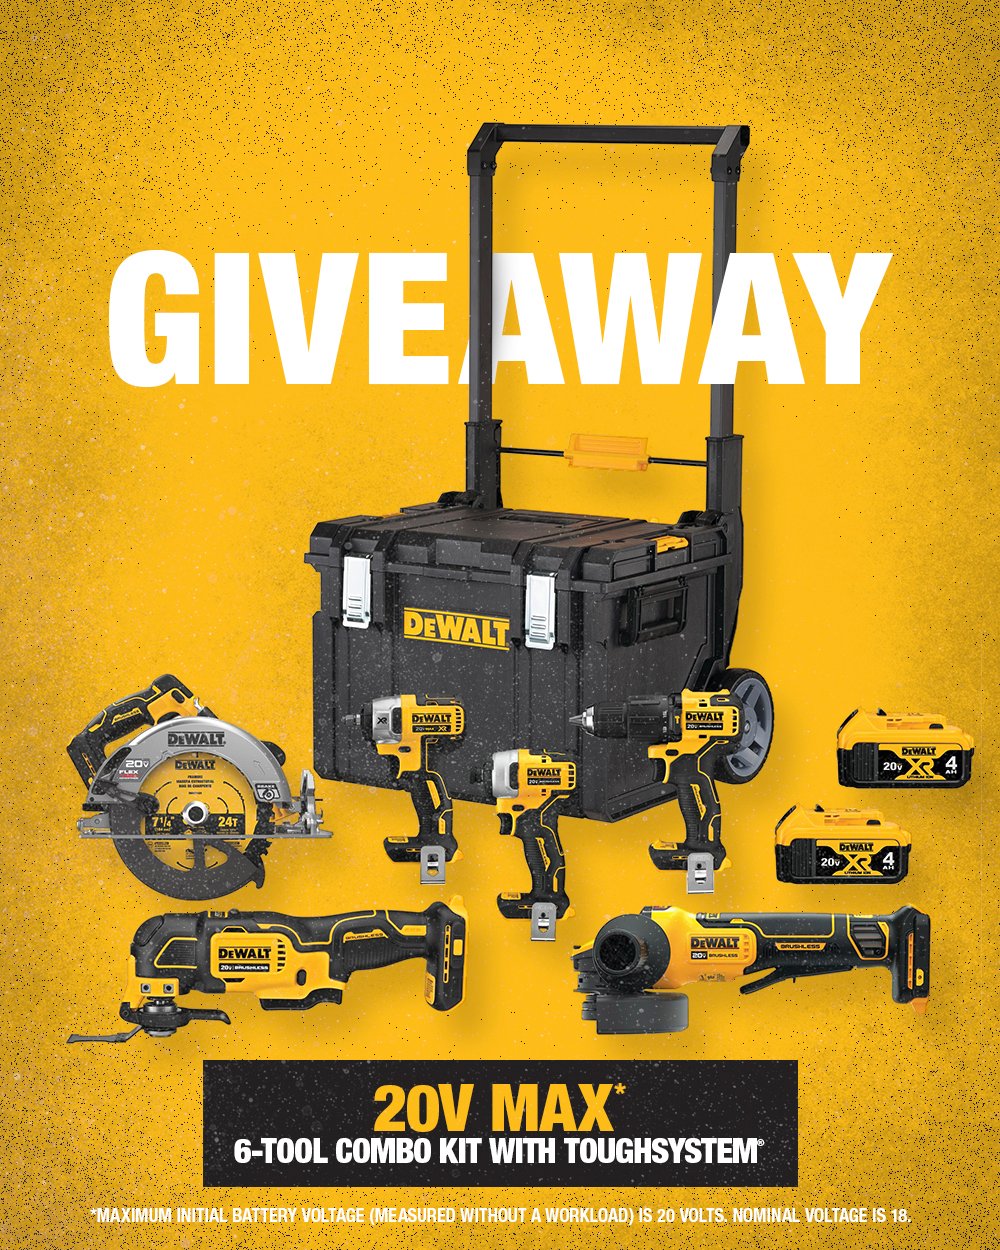 DEWALT on Twitter: "We're giving away a 20V 6-Tool Combo Kit, valued at $499. For chance to win, the QR on select DEWALT tools and follow the link